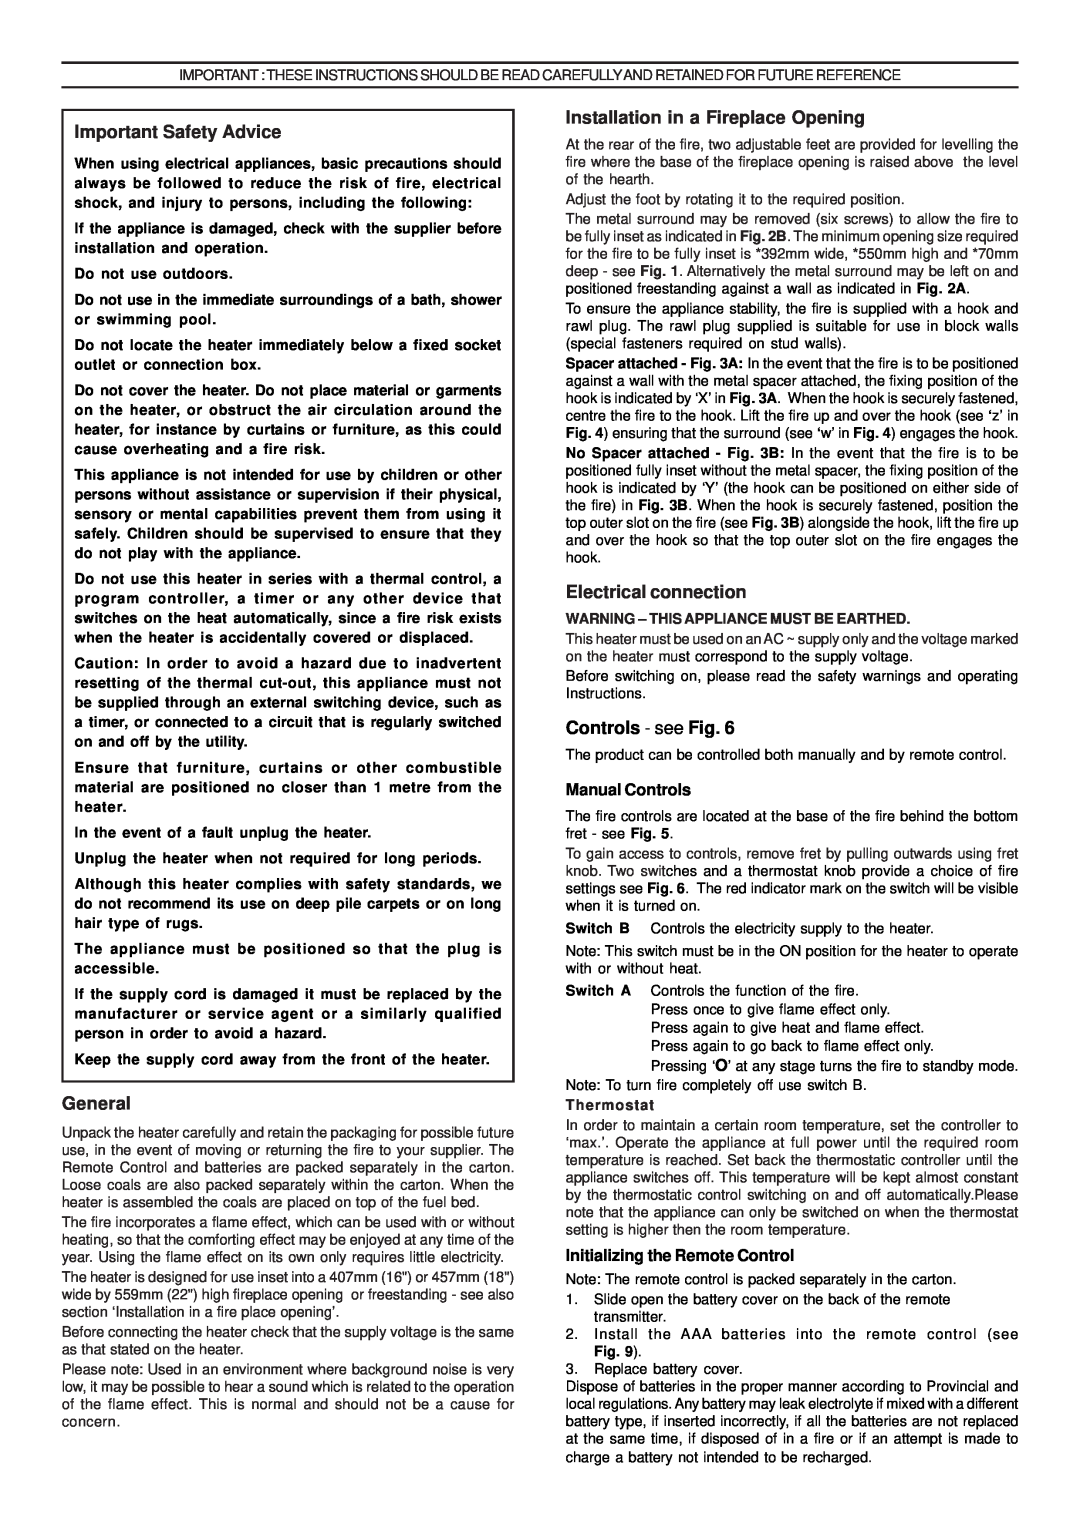 Dimplex EBY15 manual Important Safety Advice, General, Installation in a Fireplace Opening, Electrical connection 